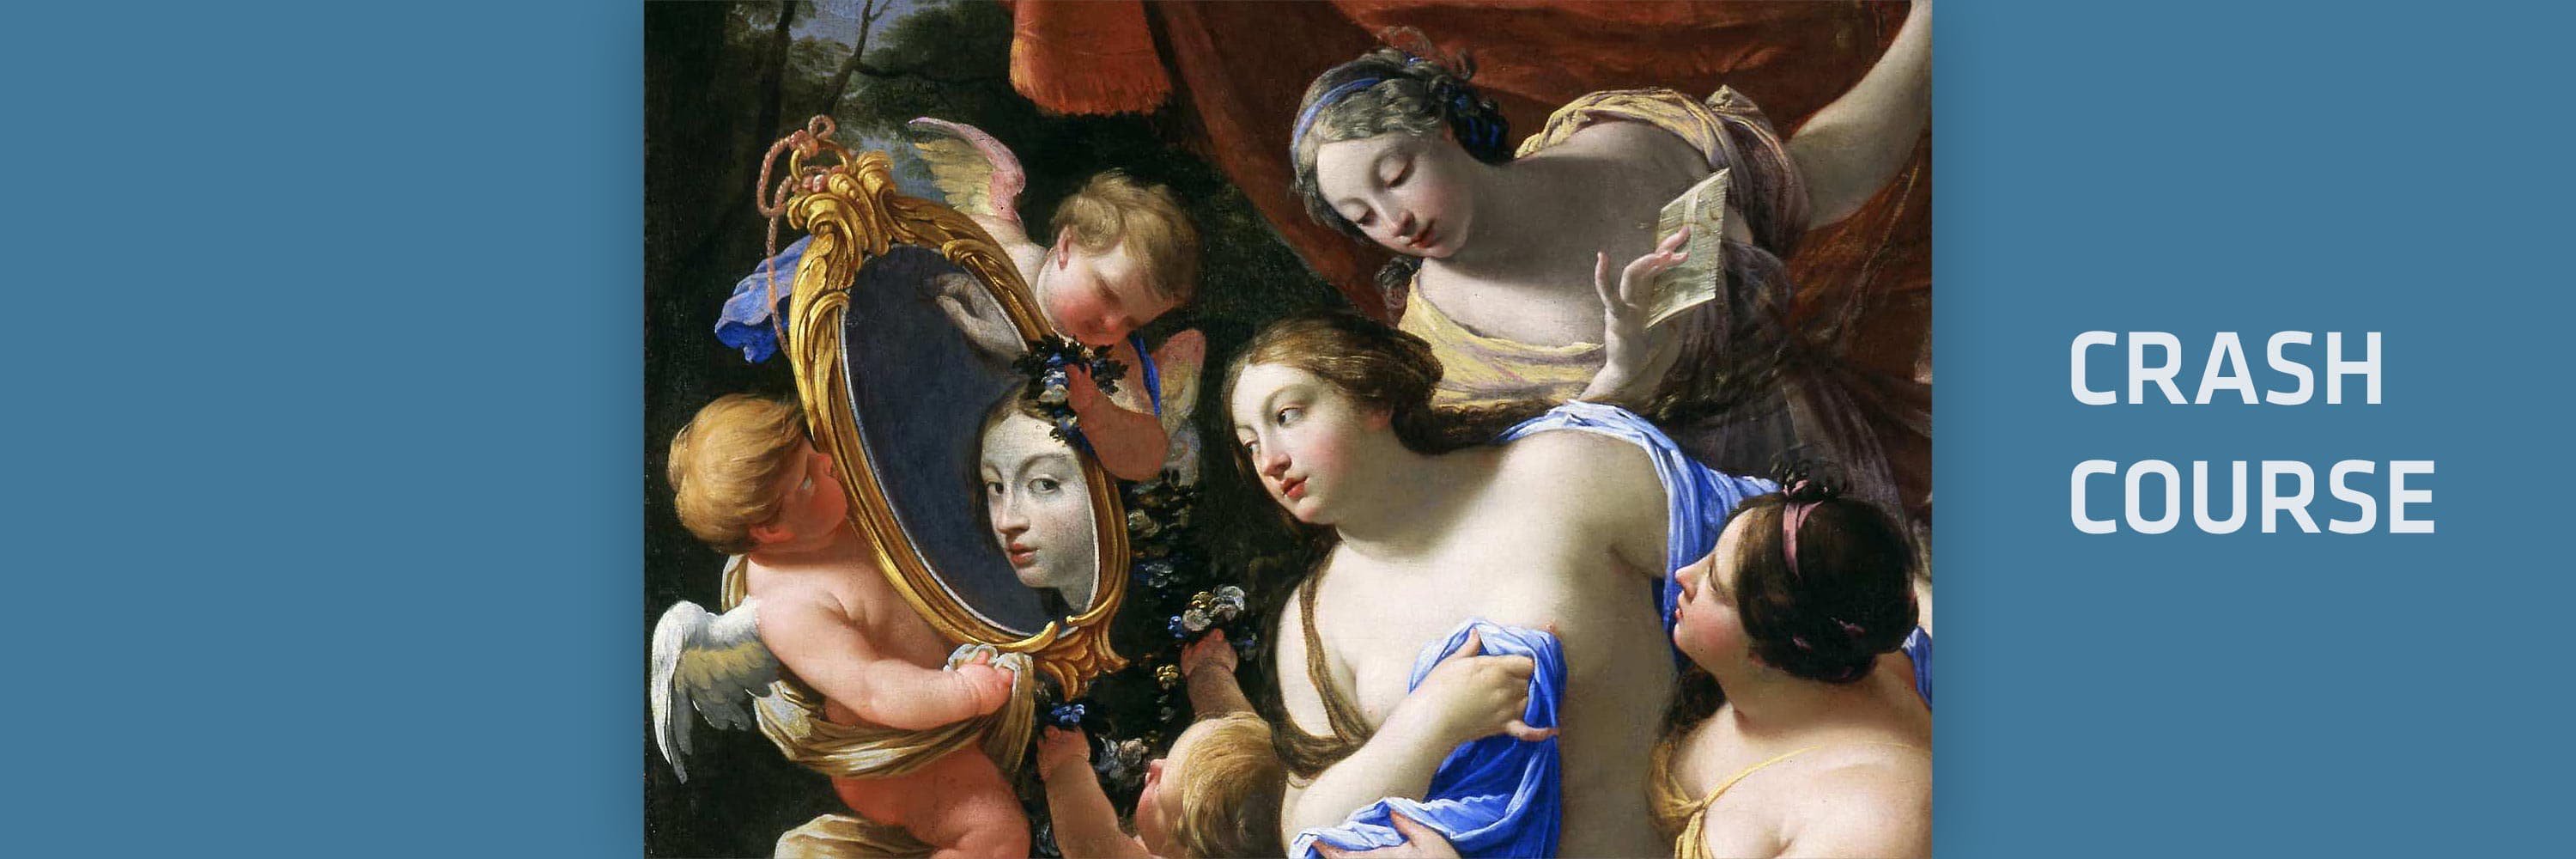 A group of women and cherubs looking into a mirror, next to the words "Crash Course"